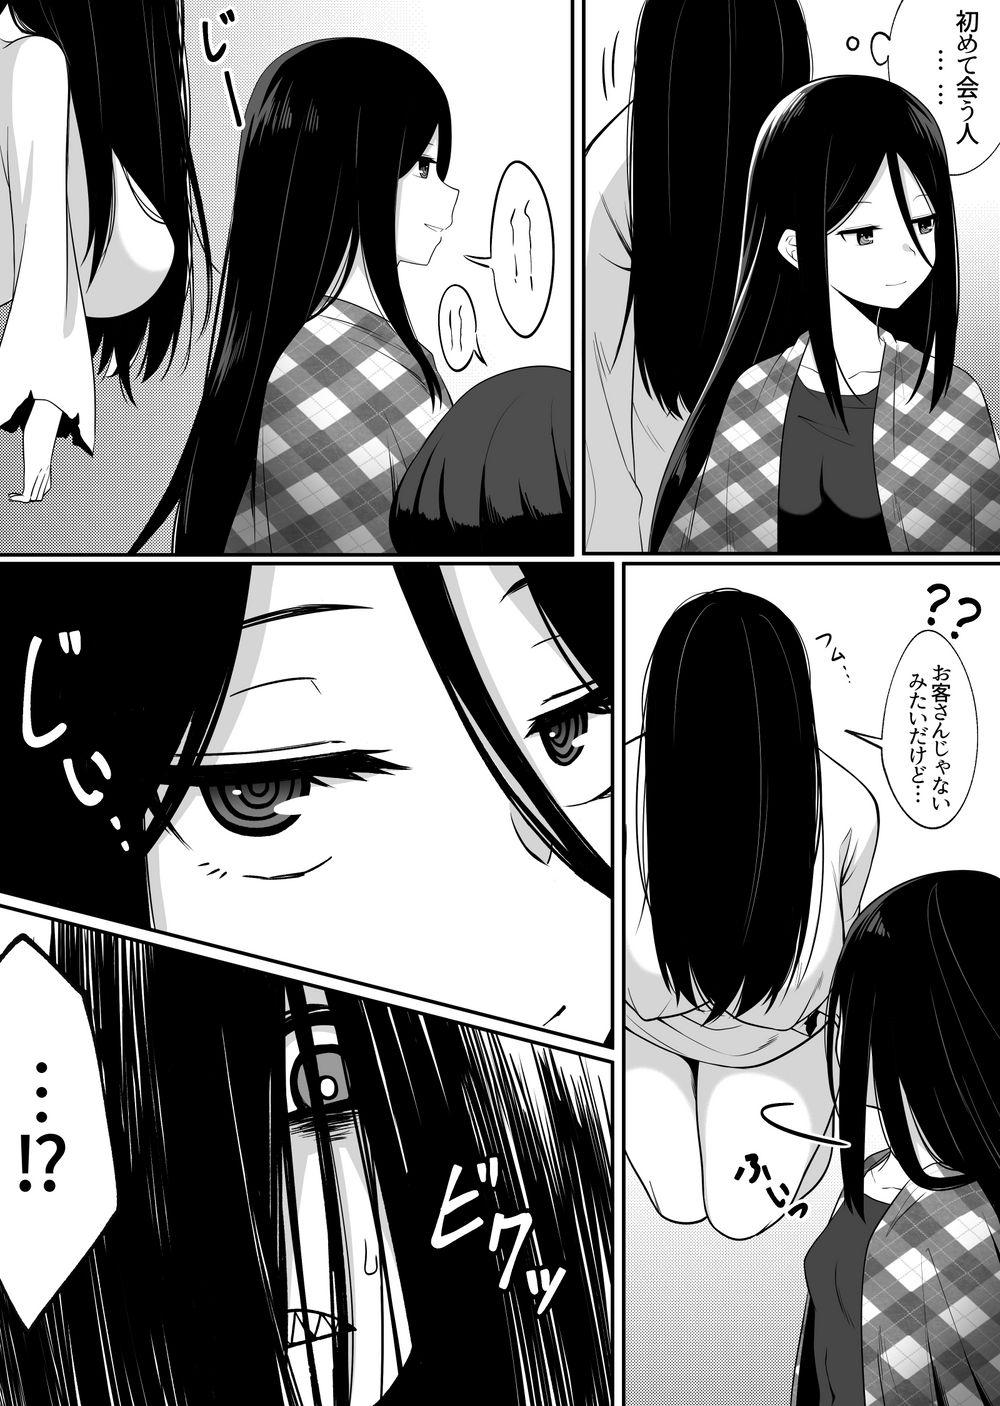 Licking INCOMPLETE [Xion] Mirror Collection 5 Teenie - Page 4